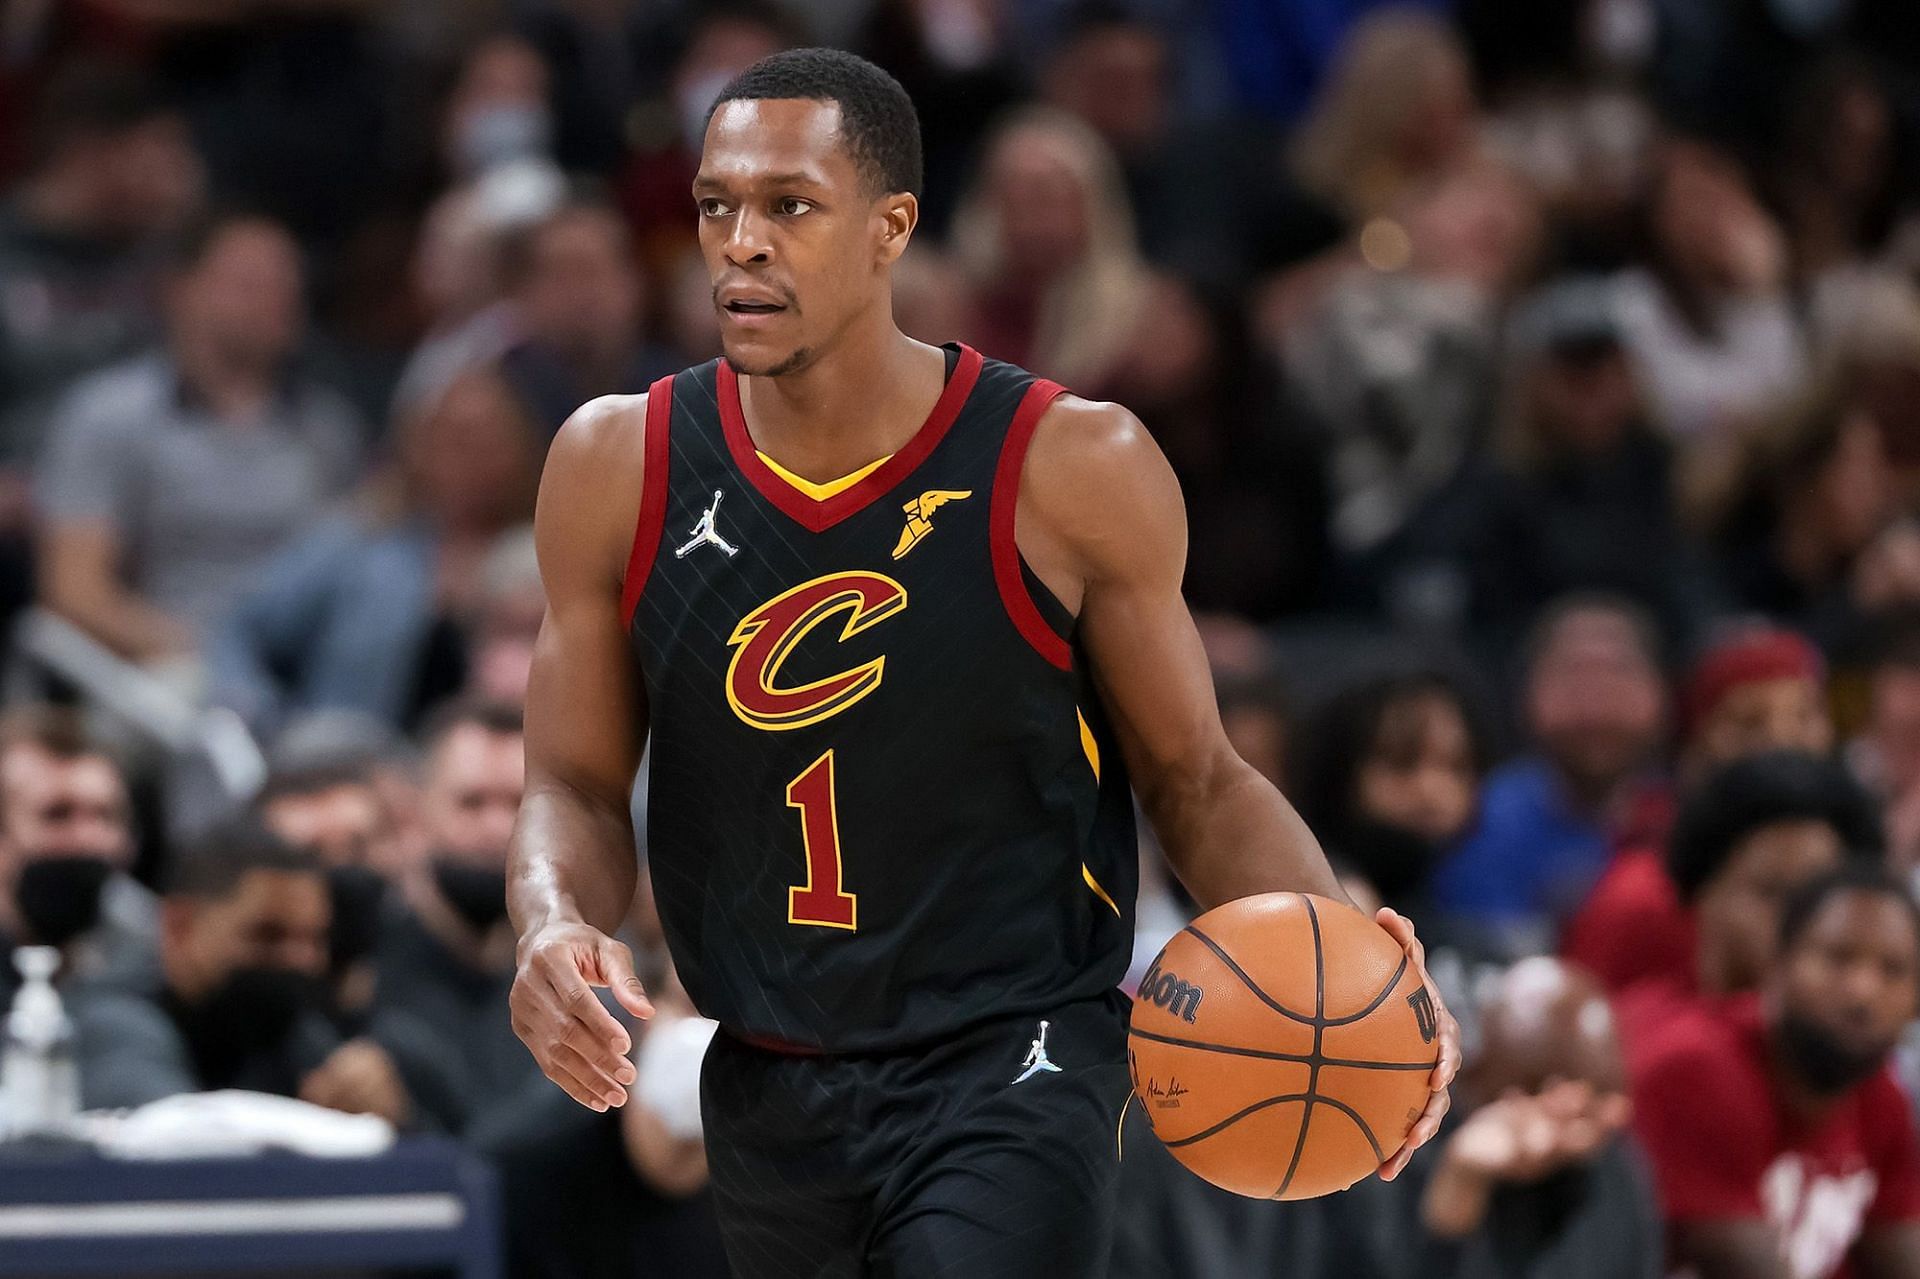 Rajon Rondo allegedly pulled gun on the mother of his kids and